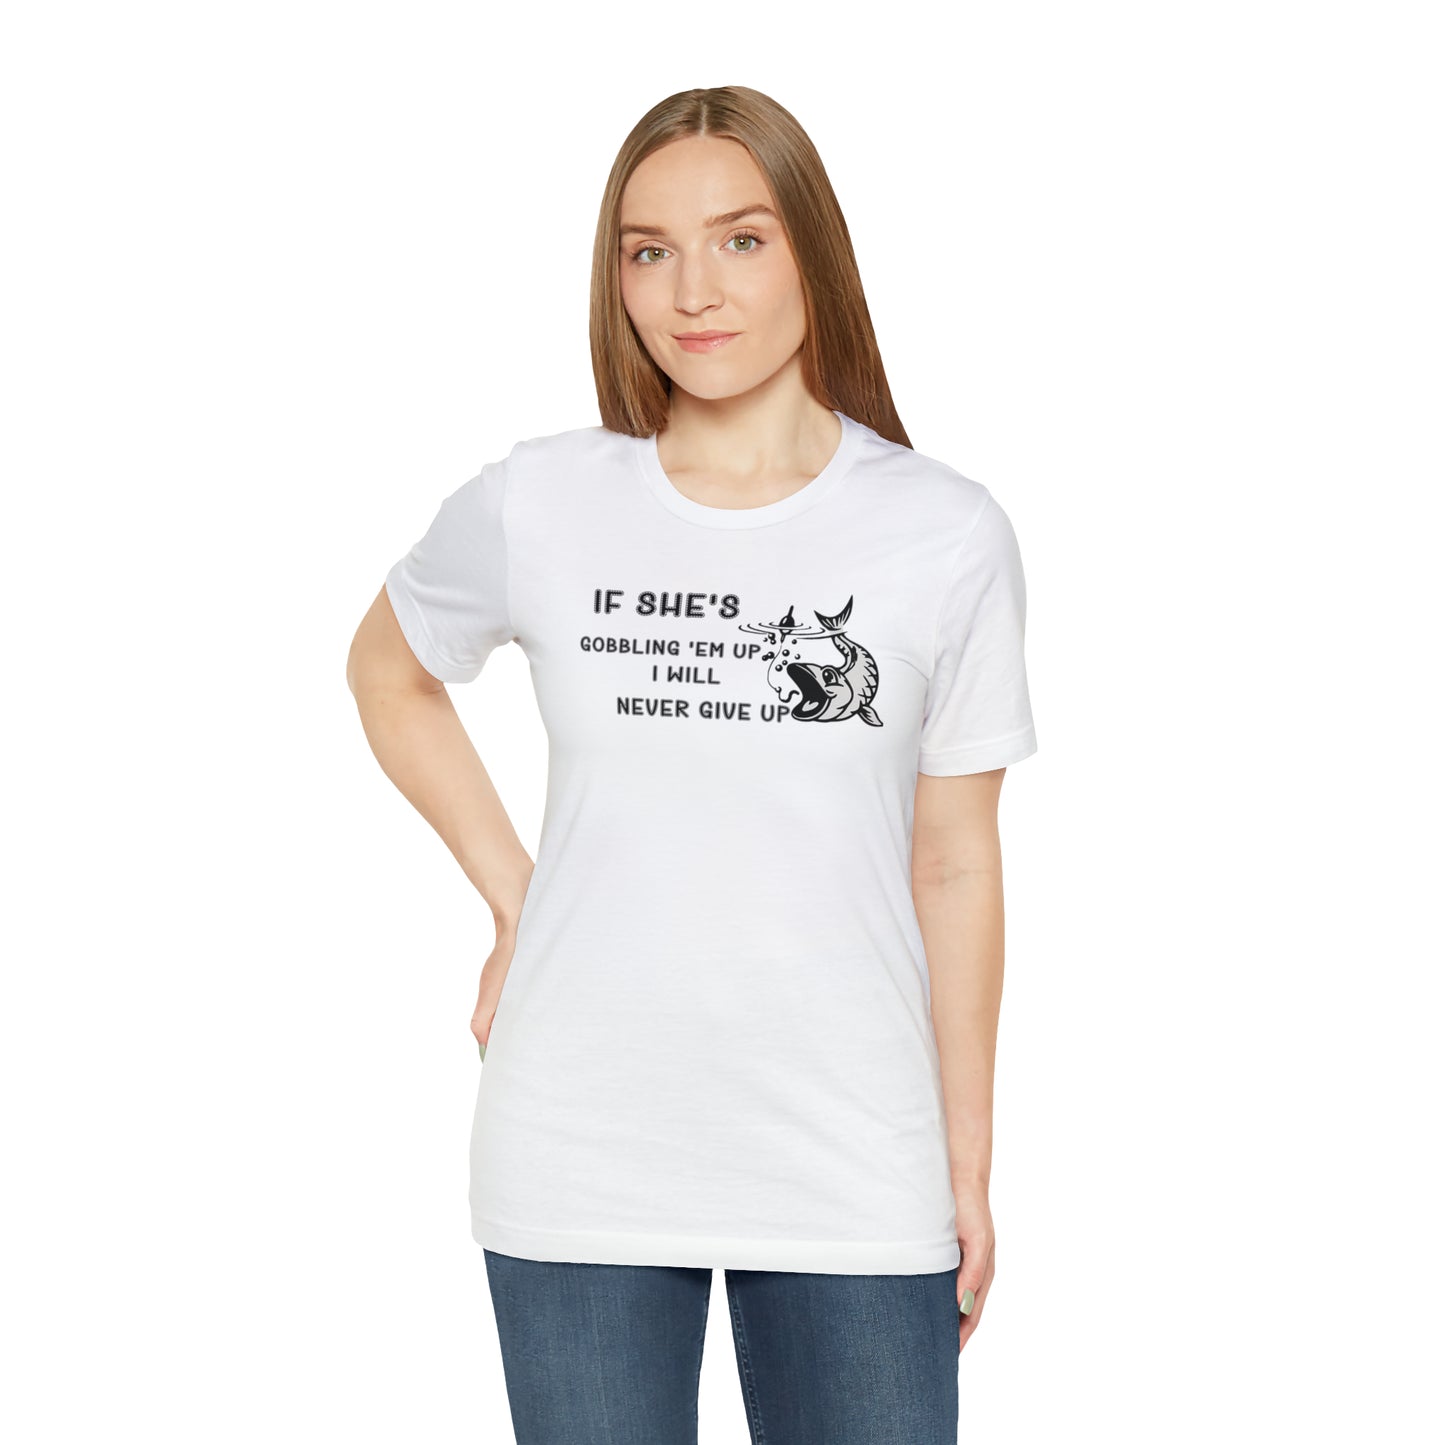 Unisex Jersey Short Sleeve Tee: IF SHE'S GOBBLING EM UP, I WILL NEVER GIVE UP